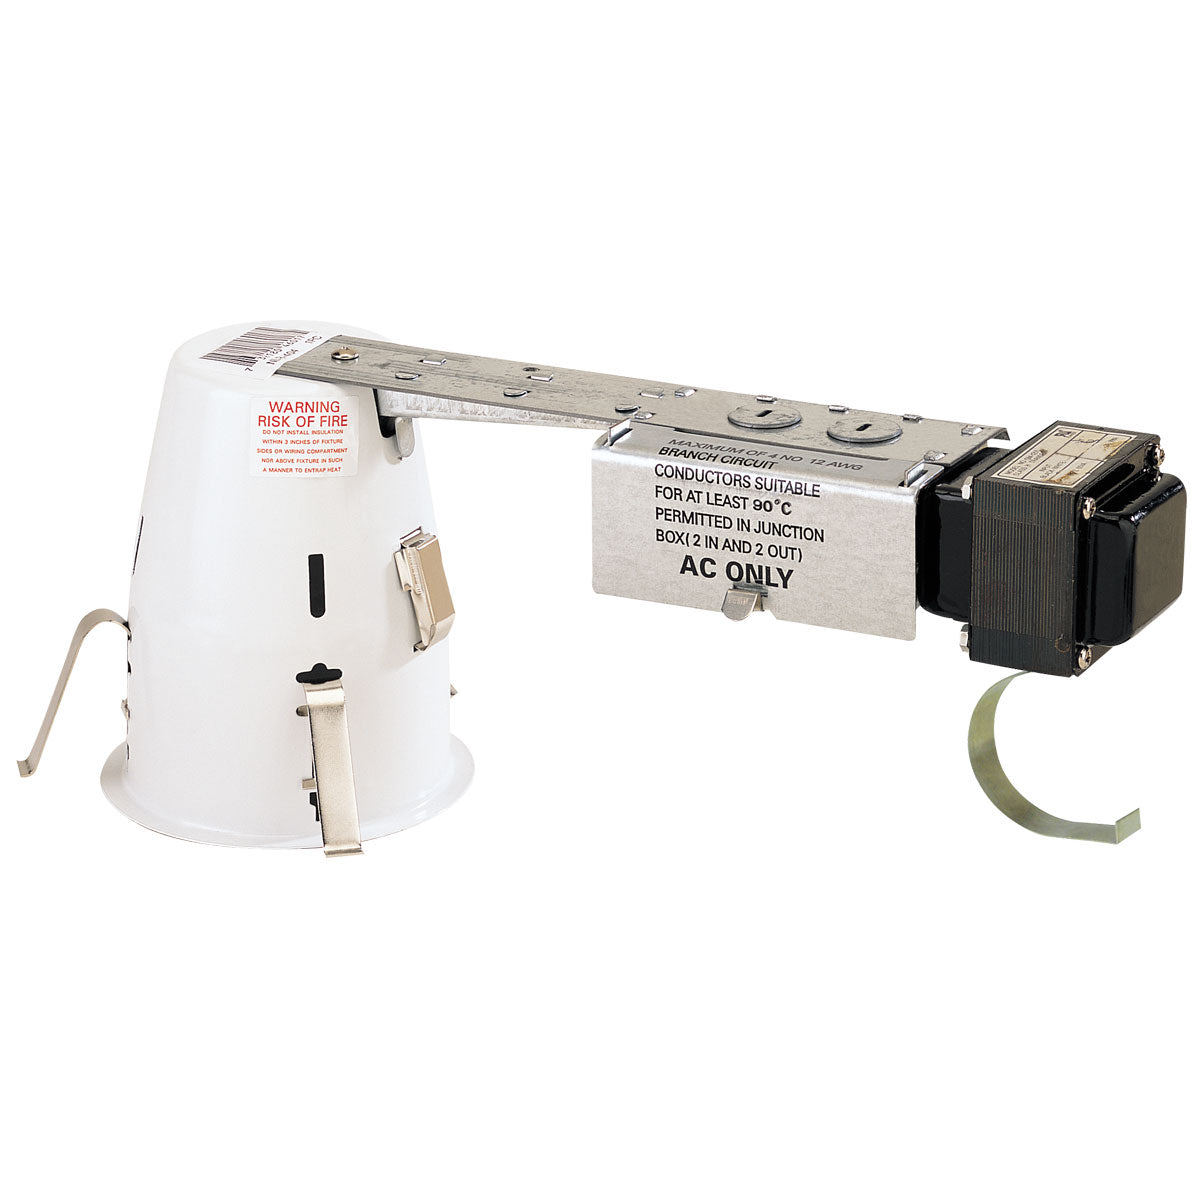 Nora Lighting NLR-404AT/1EL - Recessed - 4 Inch AT Low Voltage Housing, 120V/12V Elect. Transformer, Rated for 50W